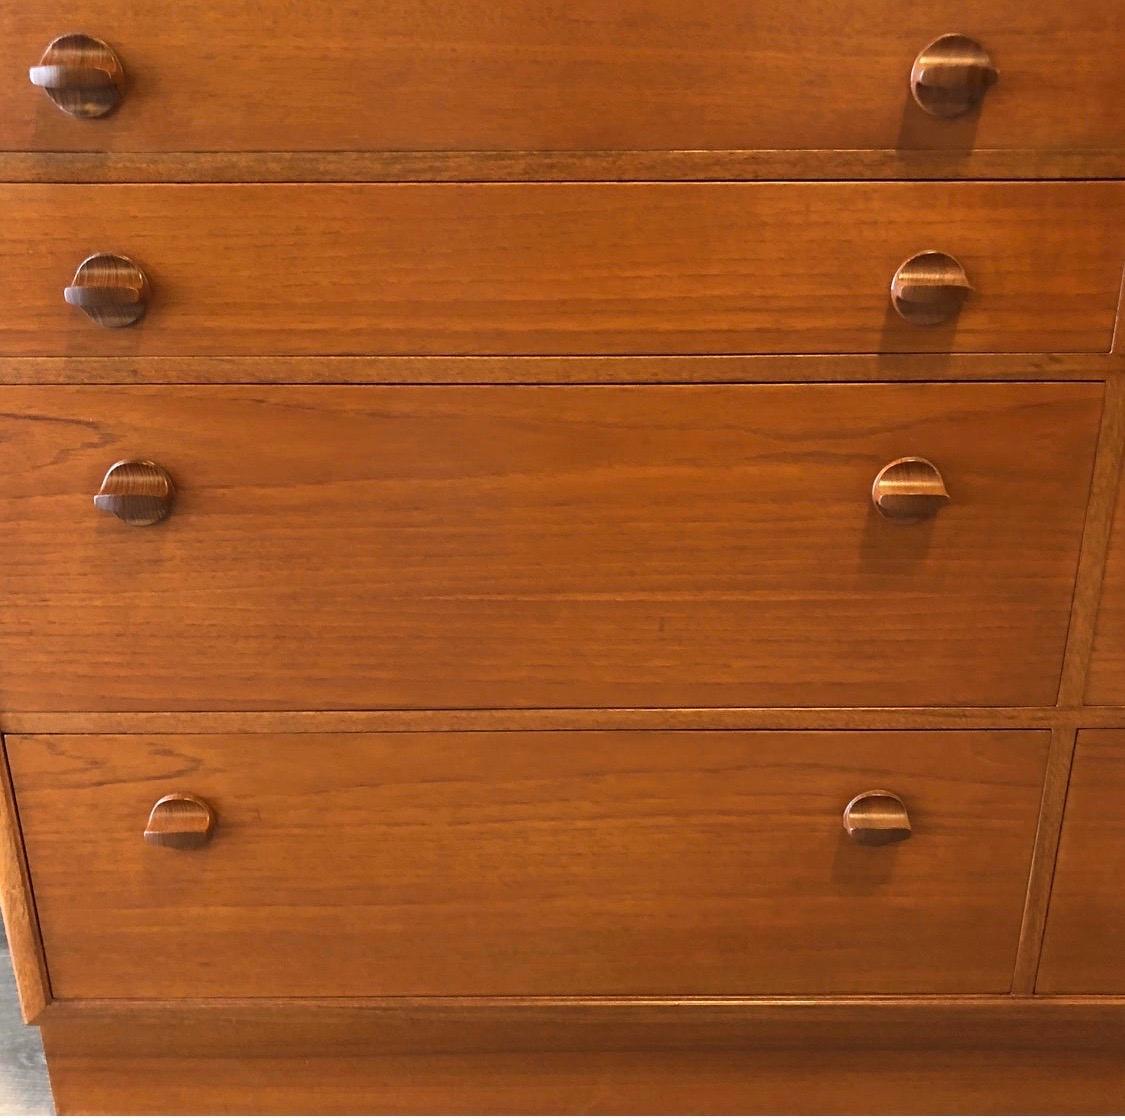 Elegant Danish modern walnut dresser that has been professionally polished. Look closely at the carved circular pulls and you'll get an idea of the craftsmanship. True period period piece from the 1970s. Ample storage and great scale.